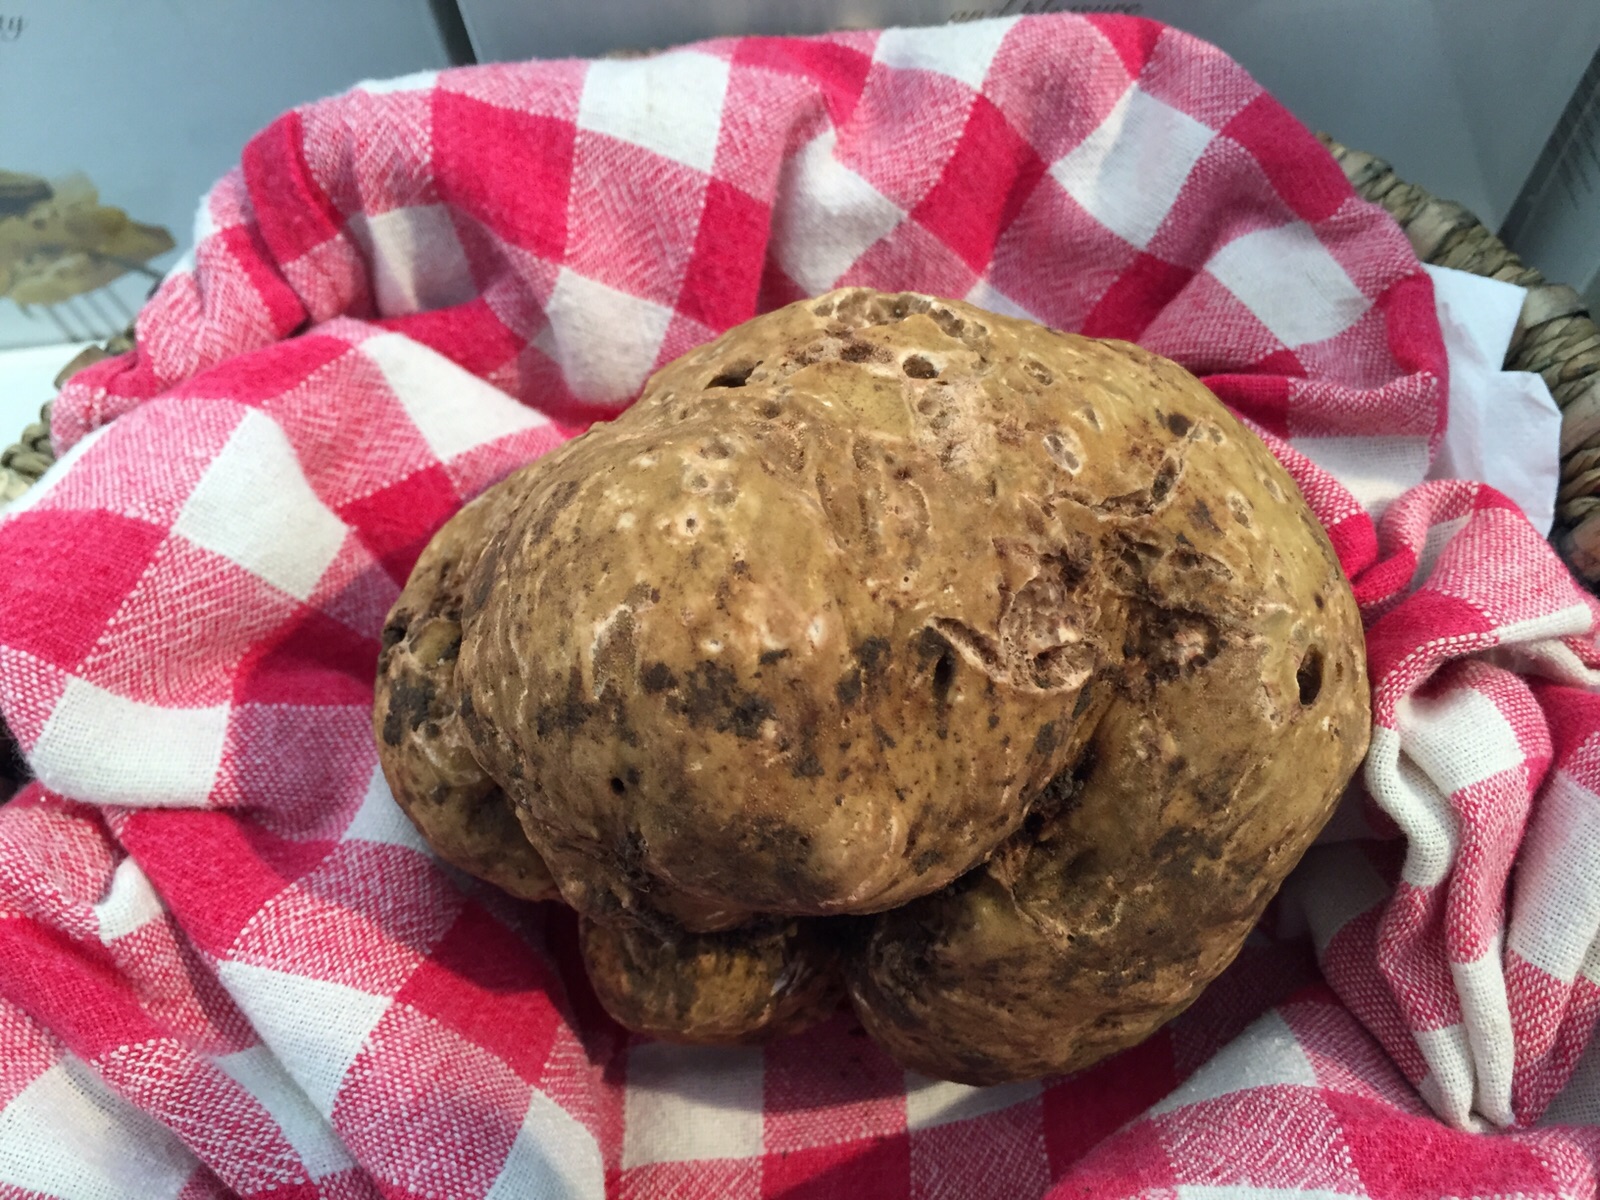 This white truffle from Alba, Italy is 1.25 pounds.